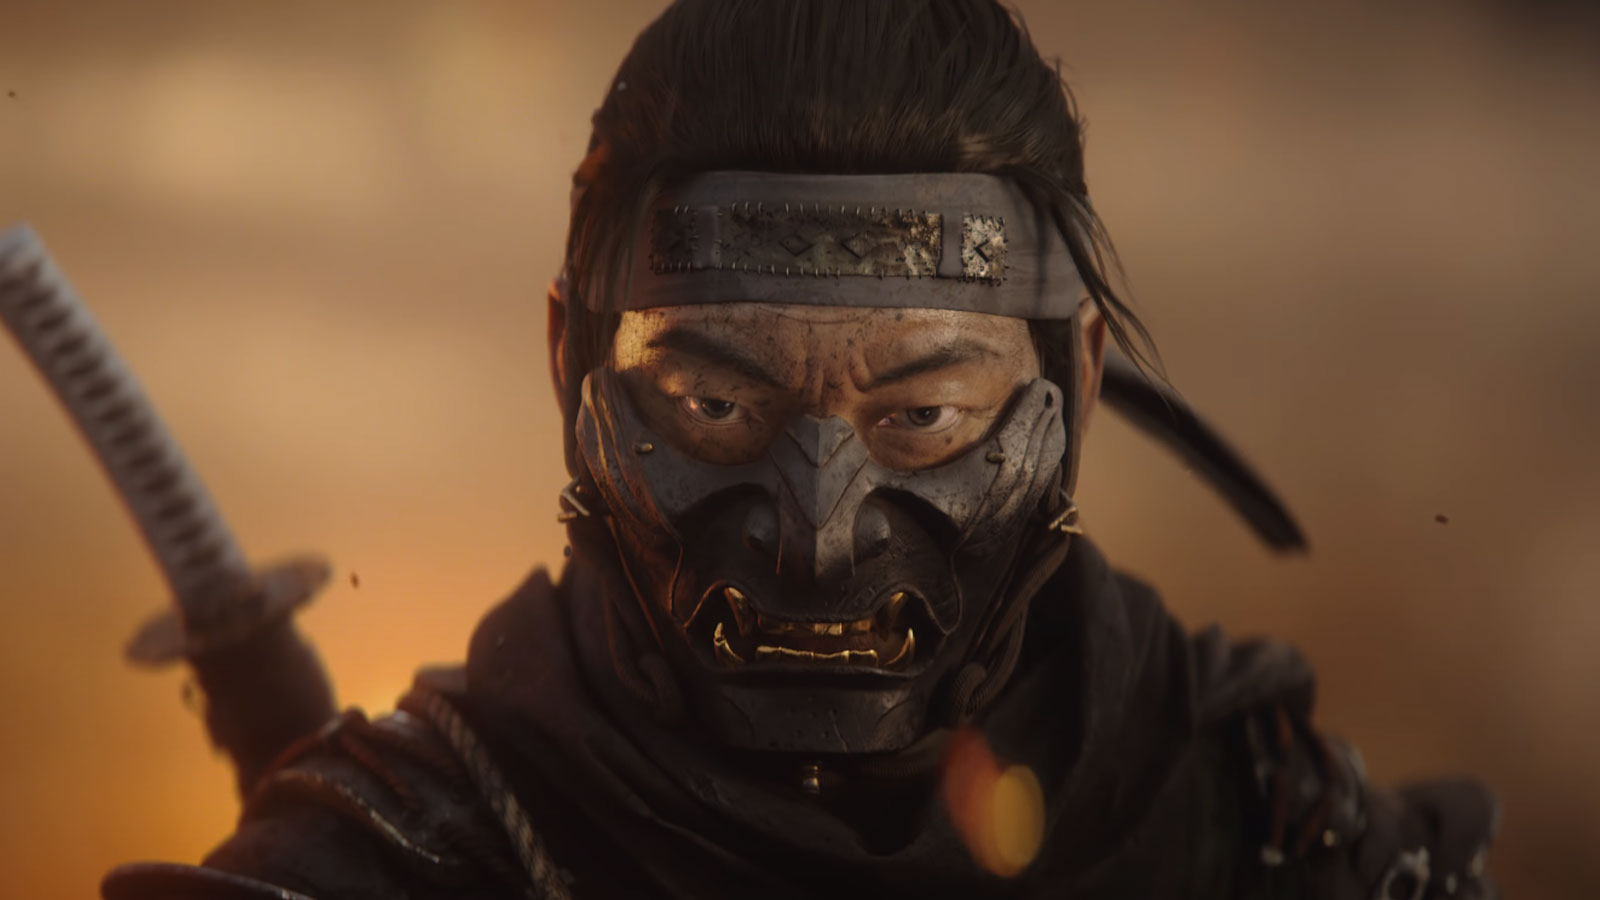 Ghost Of Tsushima: Legends Release - What We Know So Far